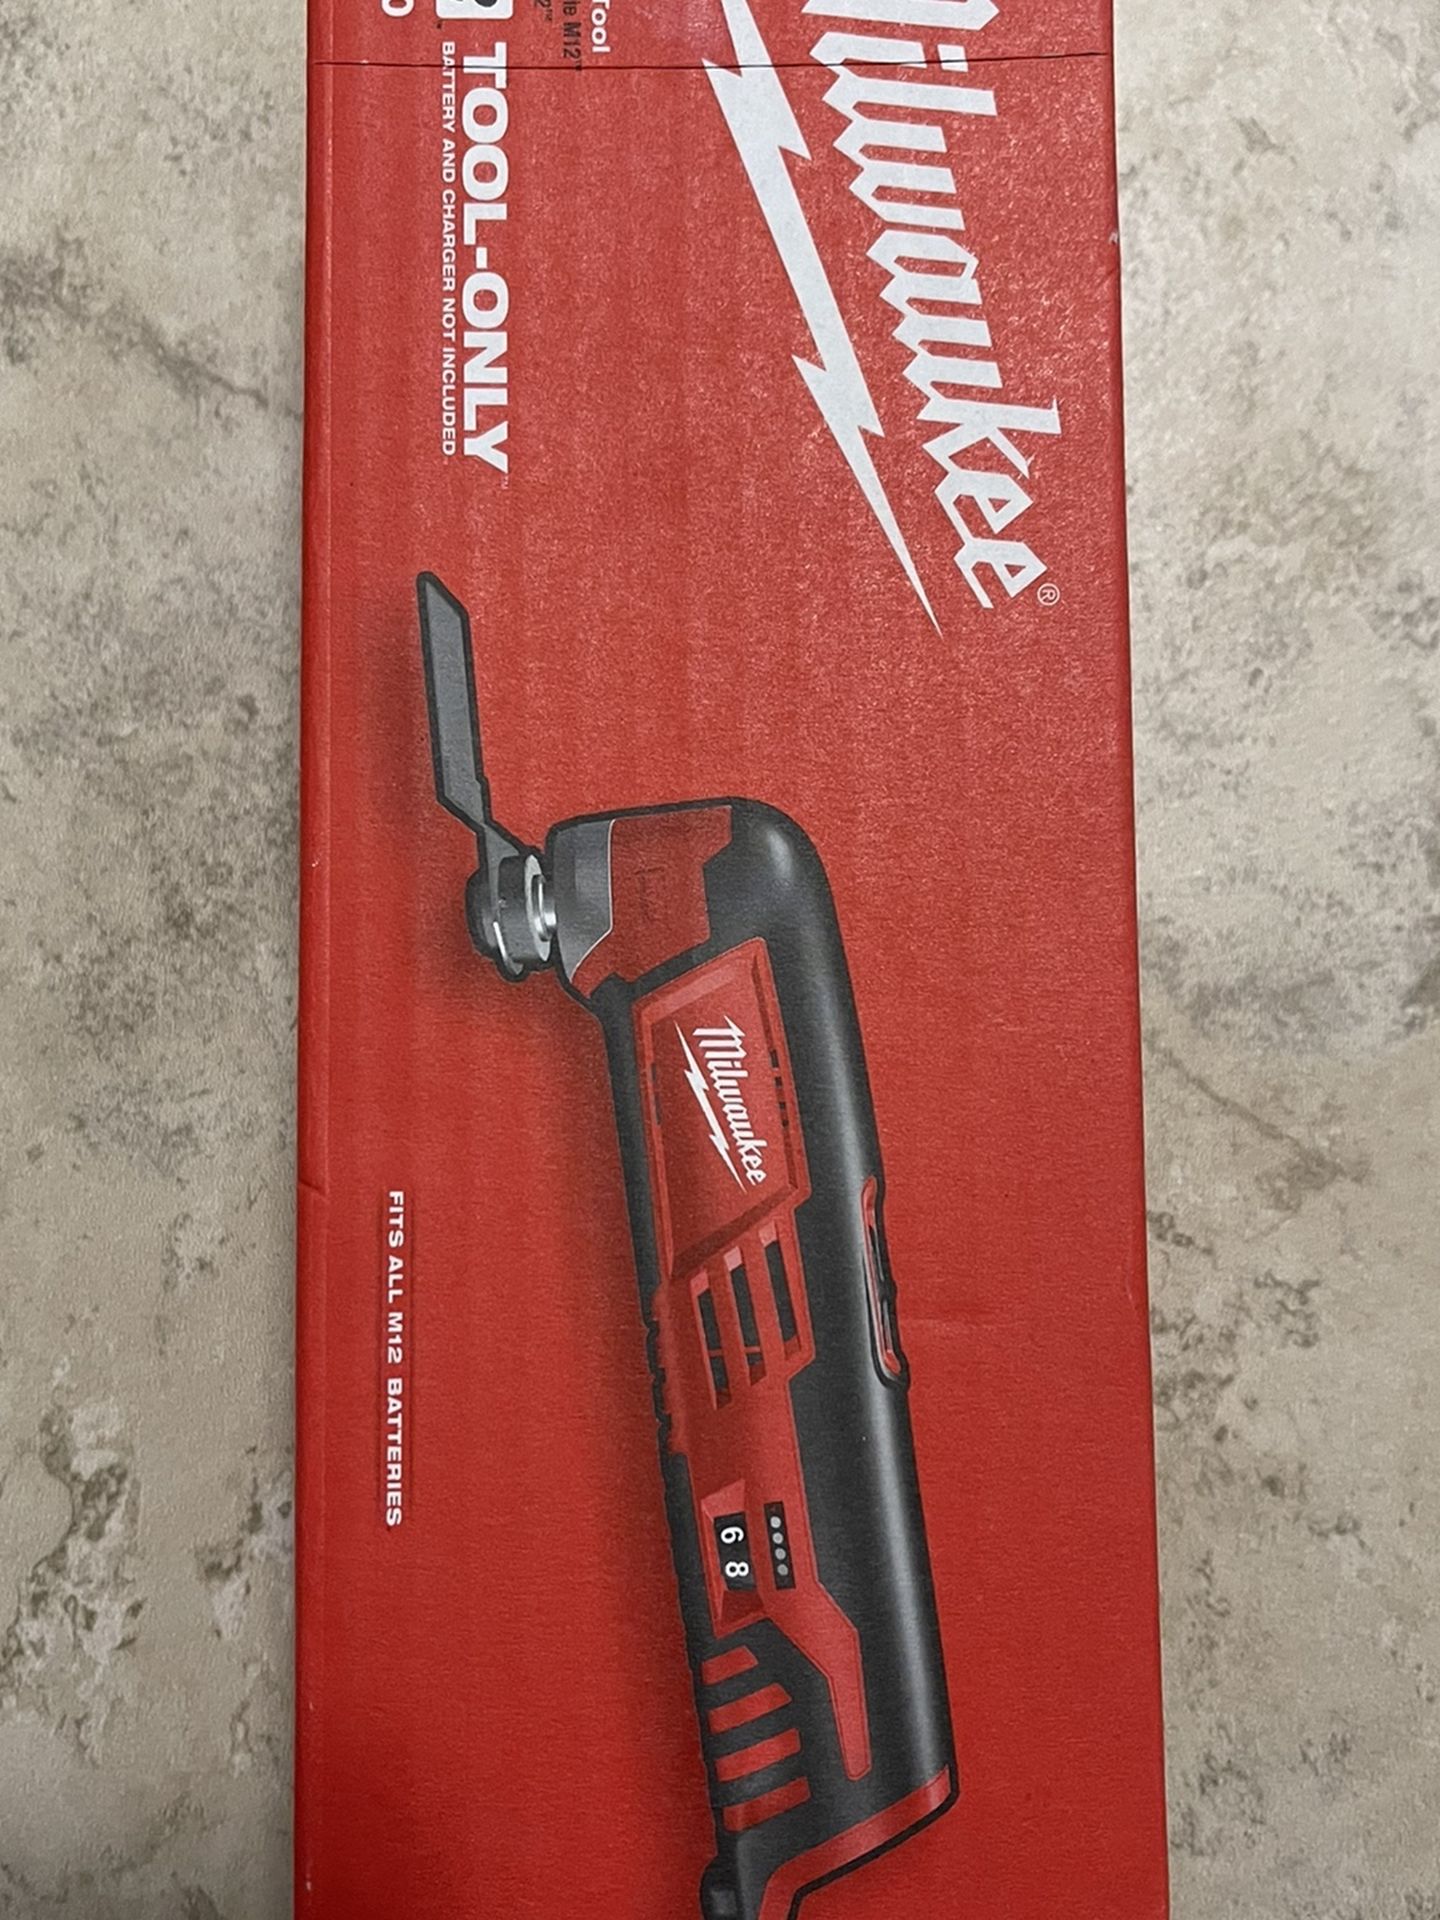 Milwaukee M12 12-Volt Lithium-Ion Cordless Oscillating Multi-Tool (Tool-Only)